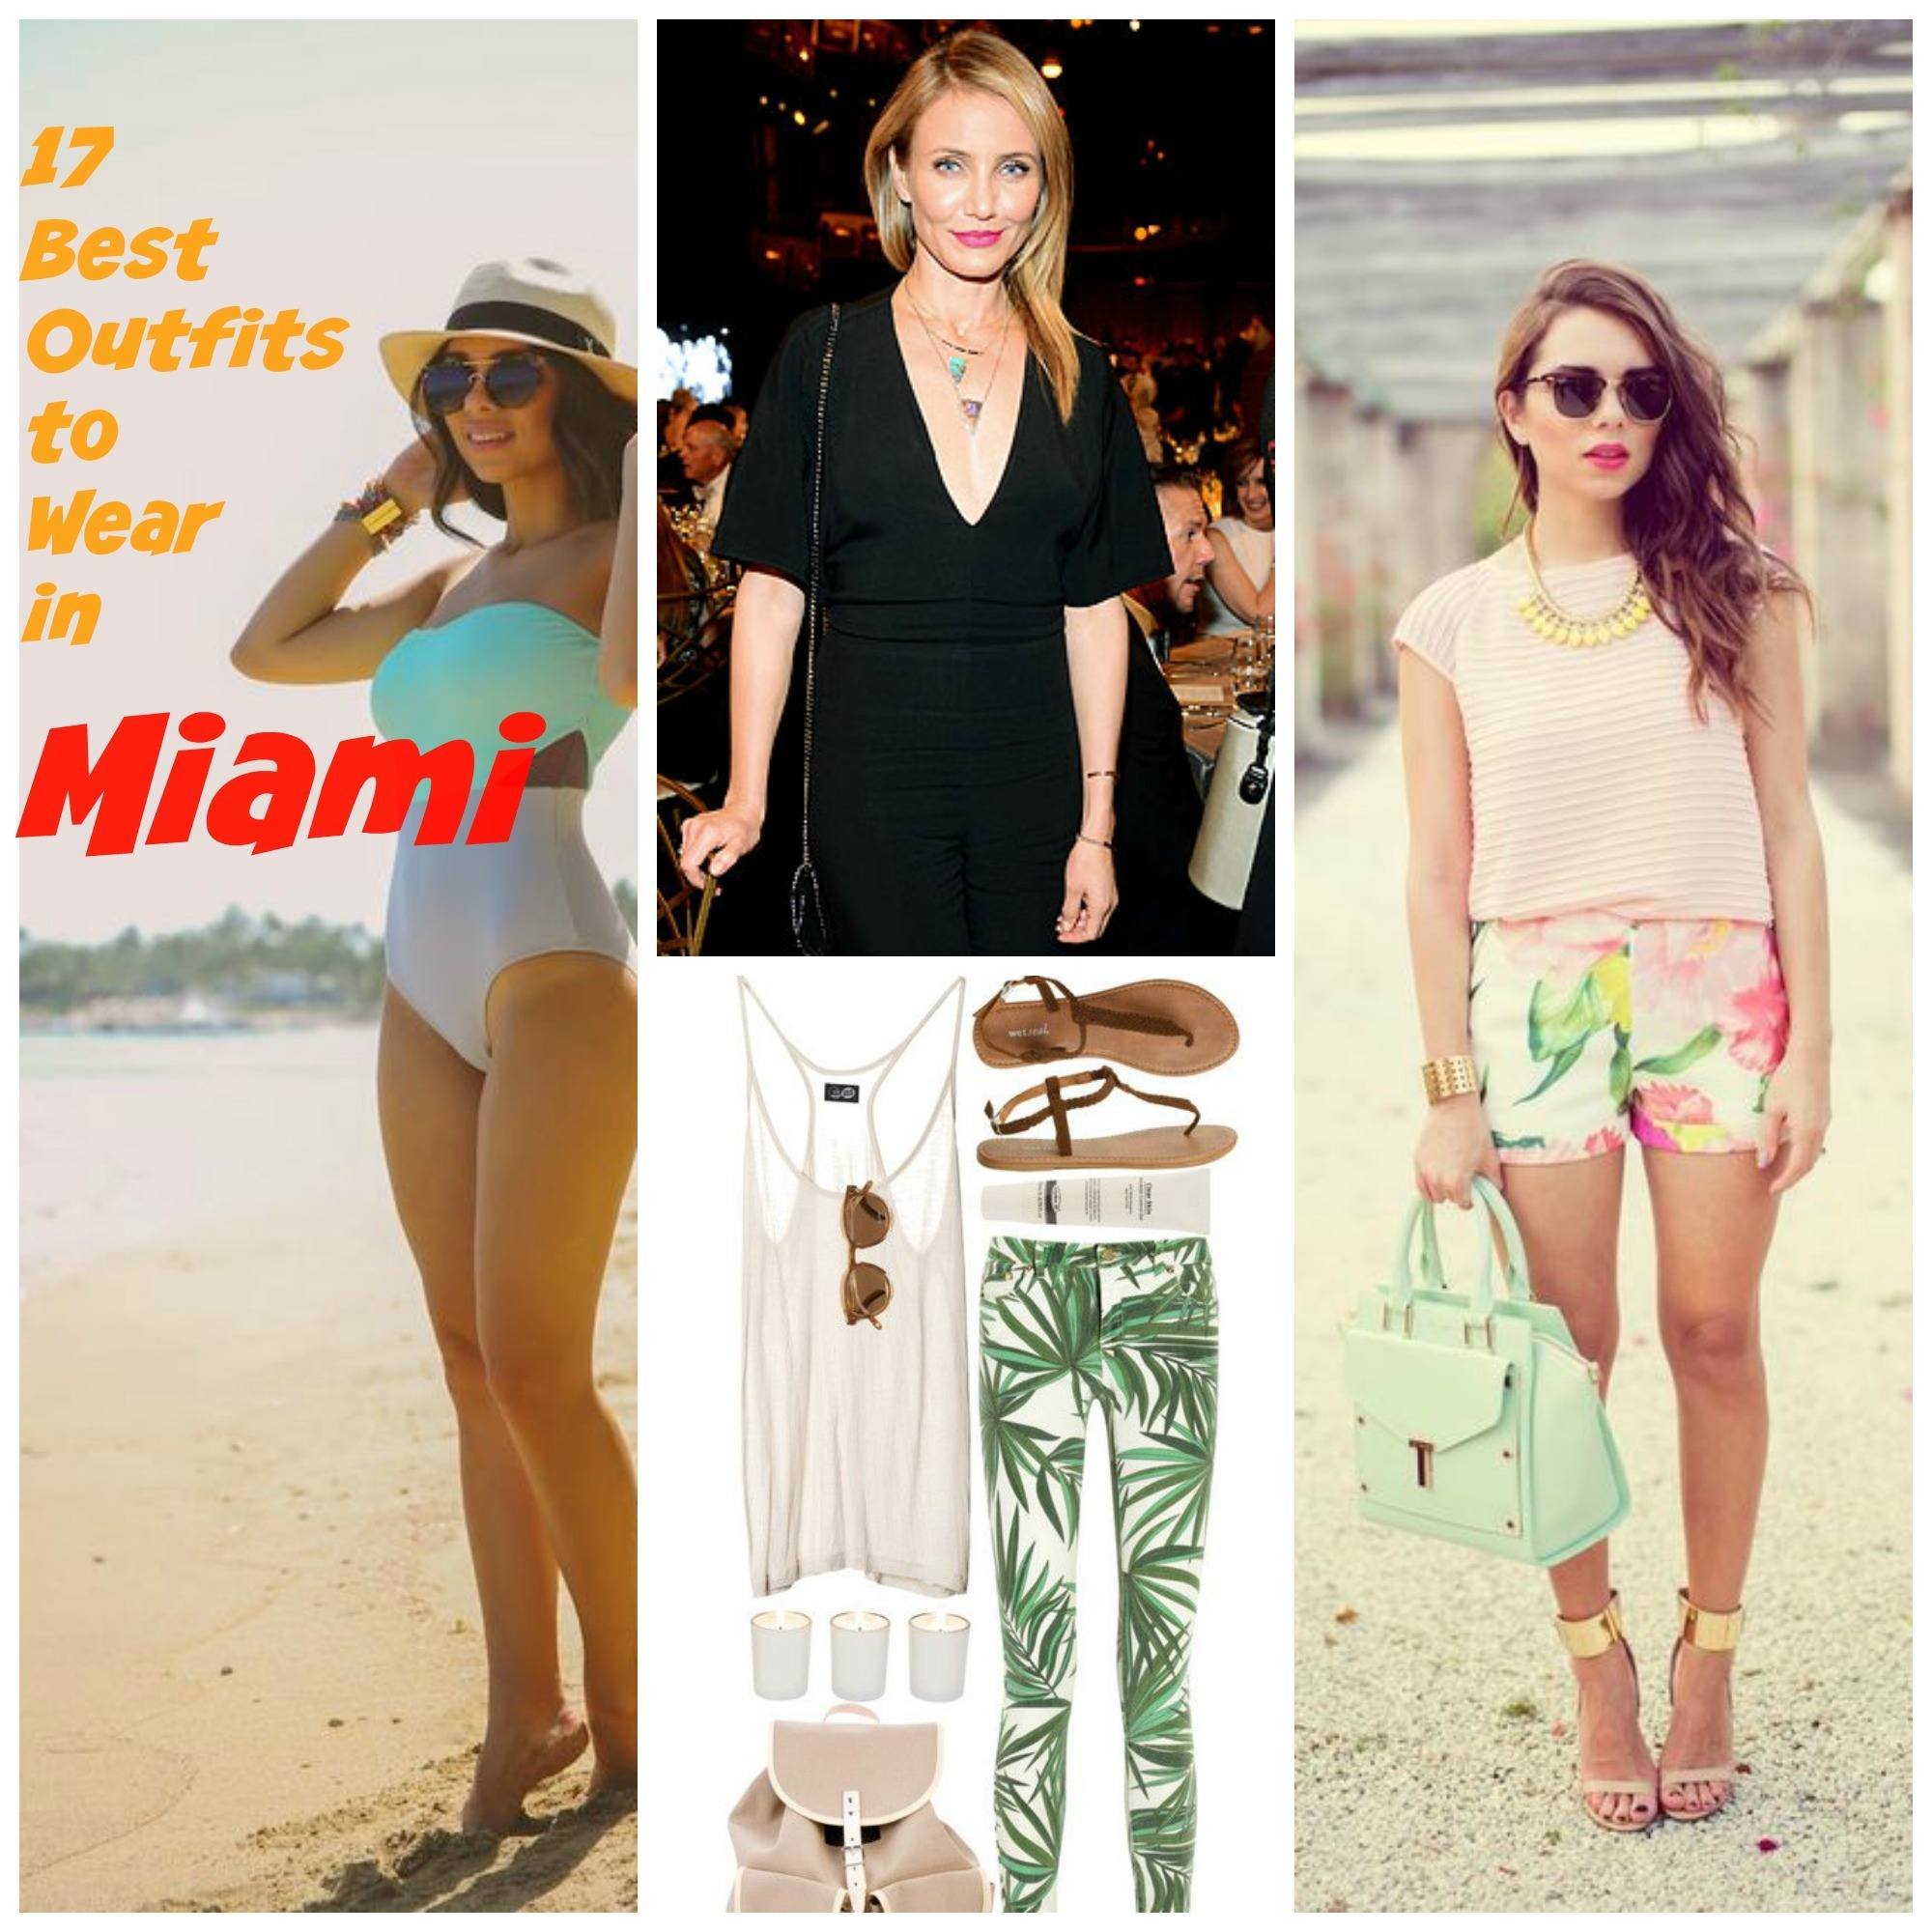 Outfit Ideas for Miami – 17 Ways to Dress up for Miami Trip